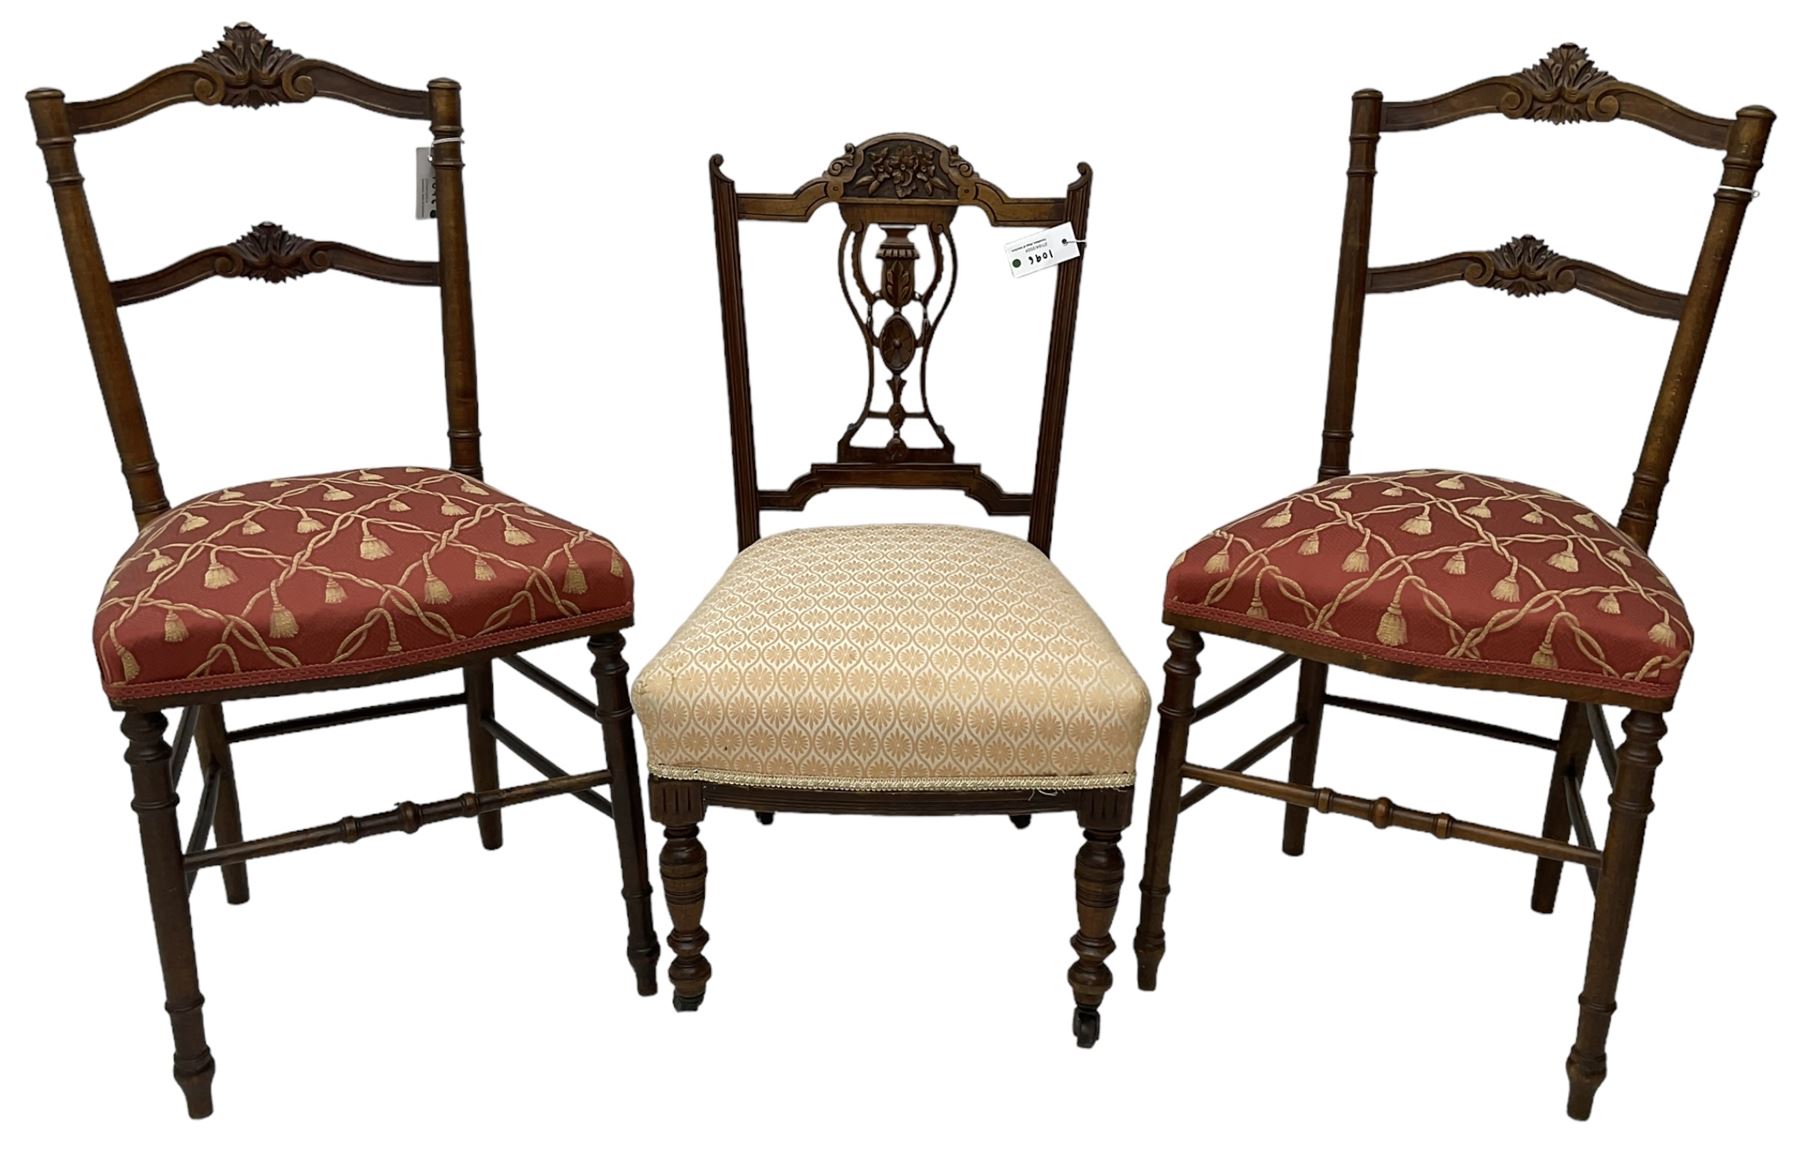 Pair of late 19th century walnut bedroom chairs - Image 2 of 4